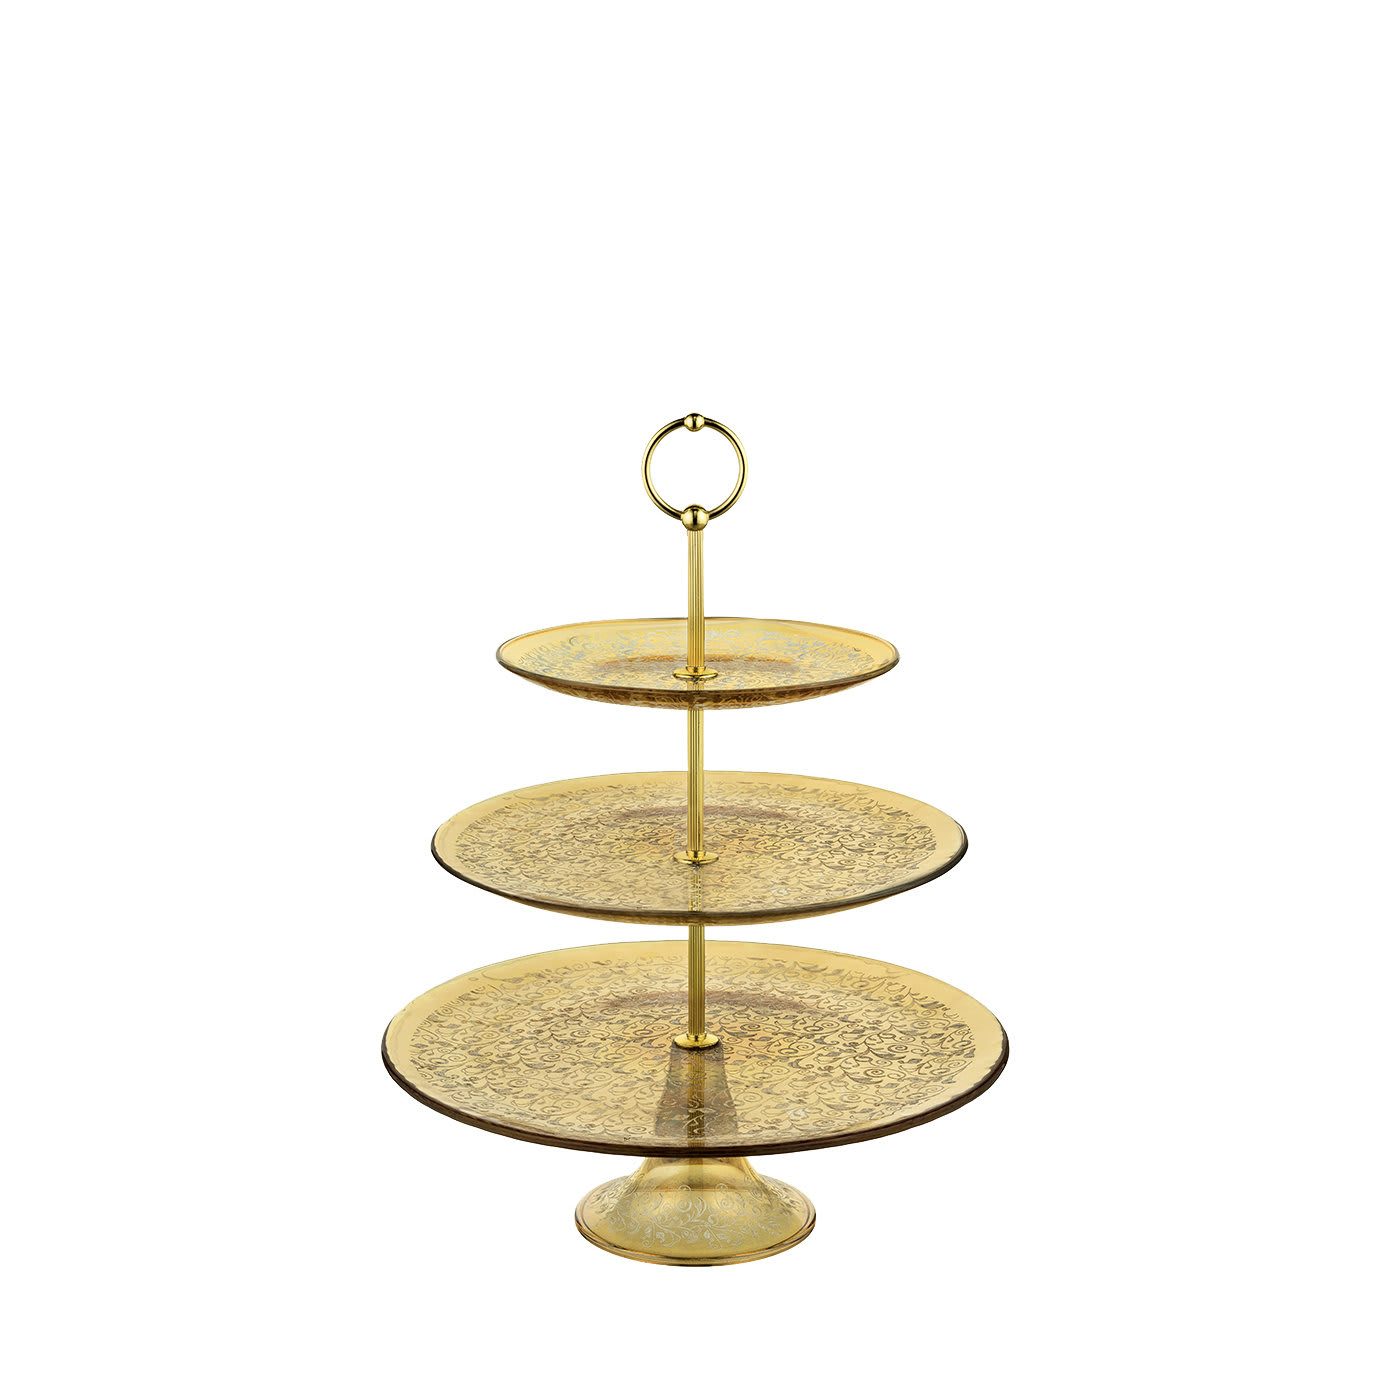 Ravel 15 Tiered Cake Stand - Creart